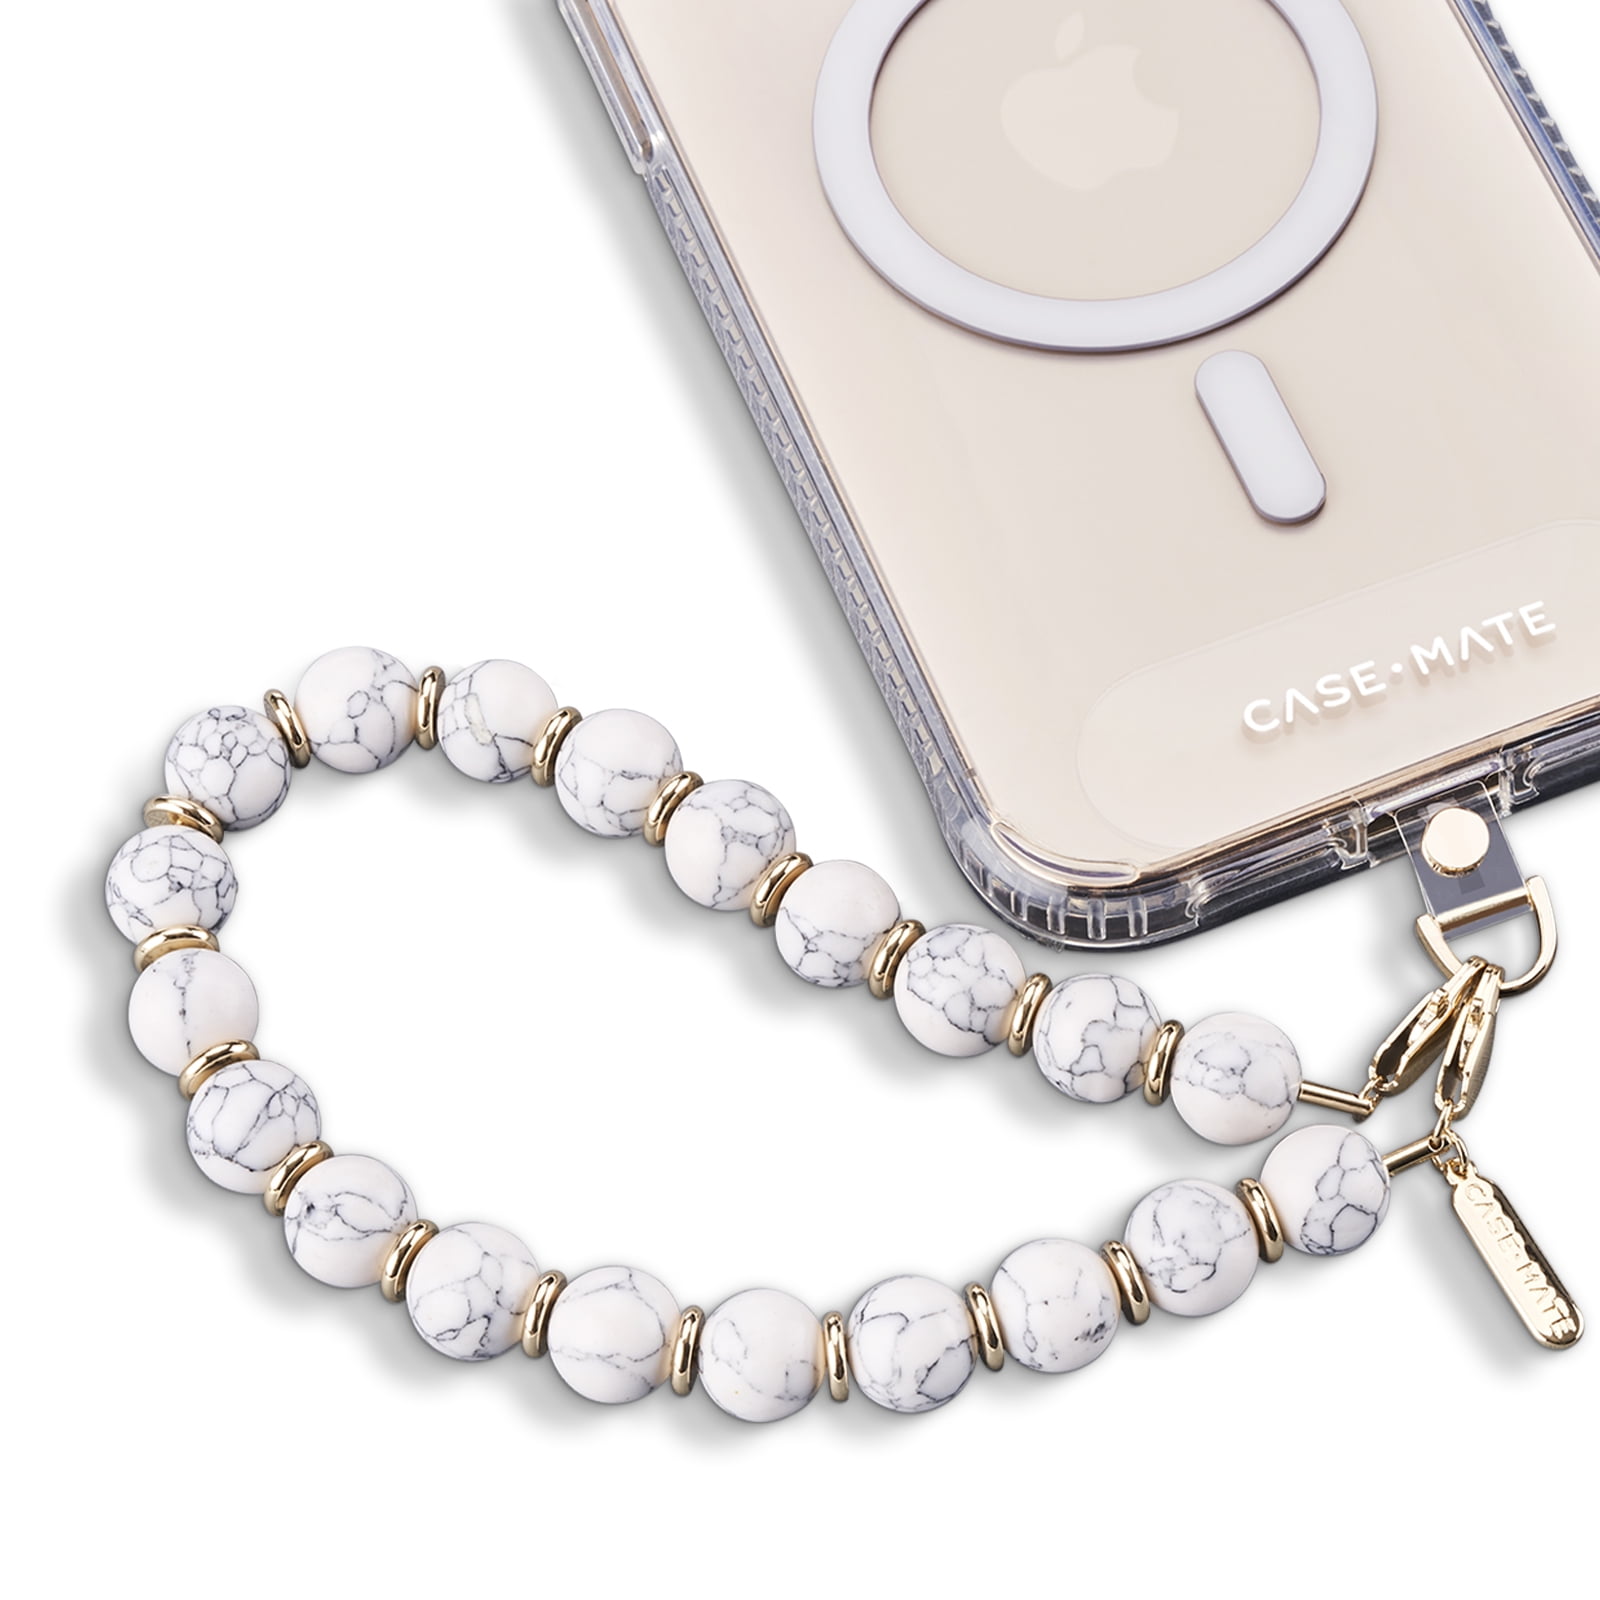 Case-Mate Phone Strap Wristlet - Dainty Gold Chain